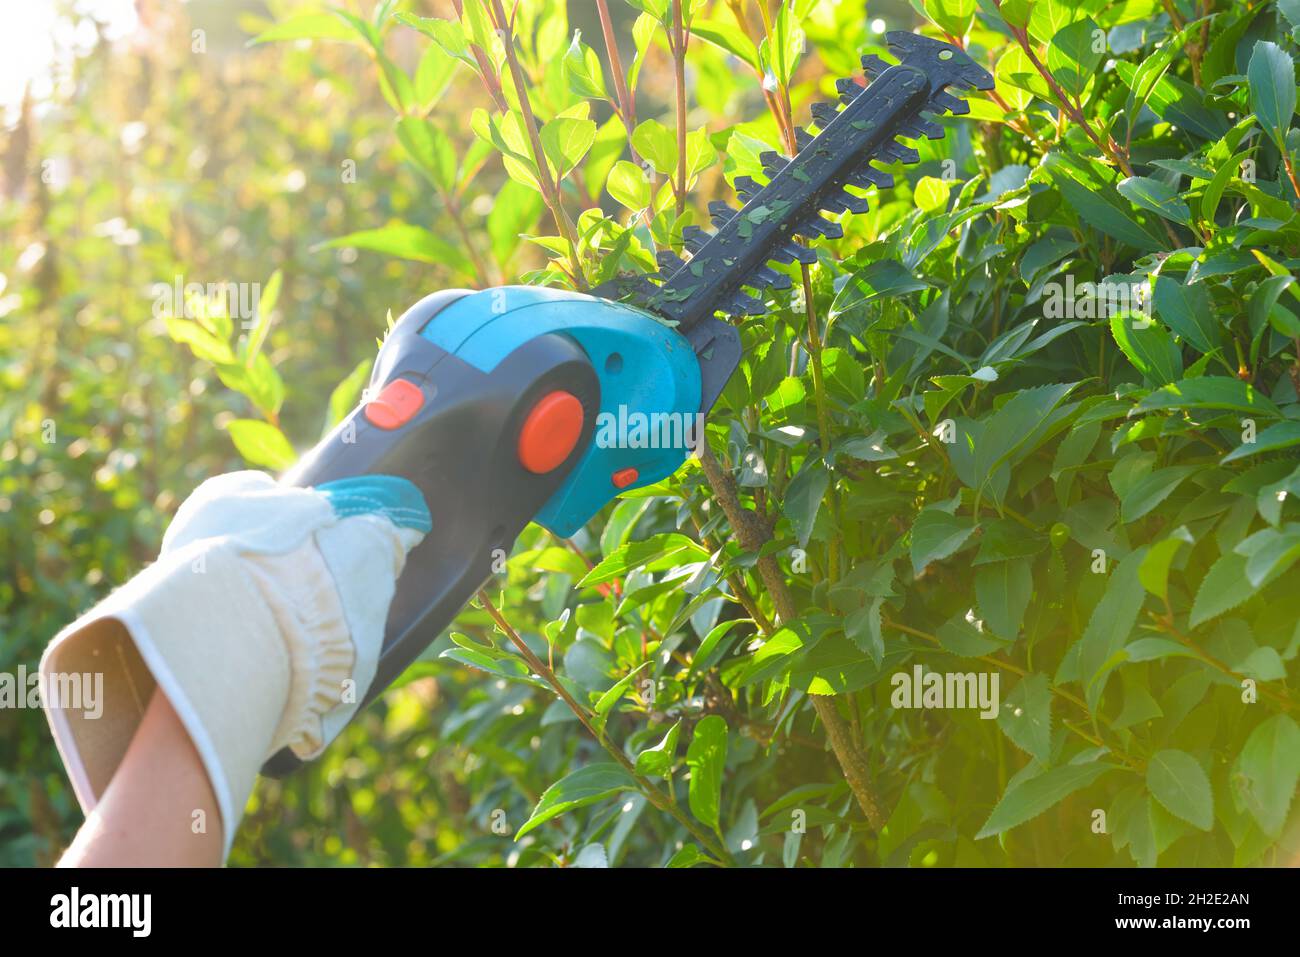 Hands with garden battery shears cutting a hedge Stock Photo